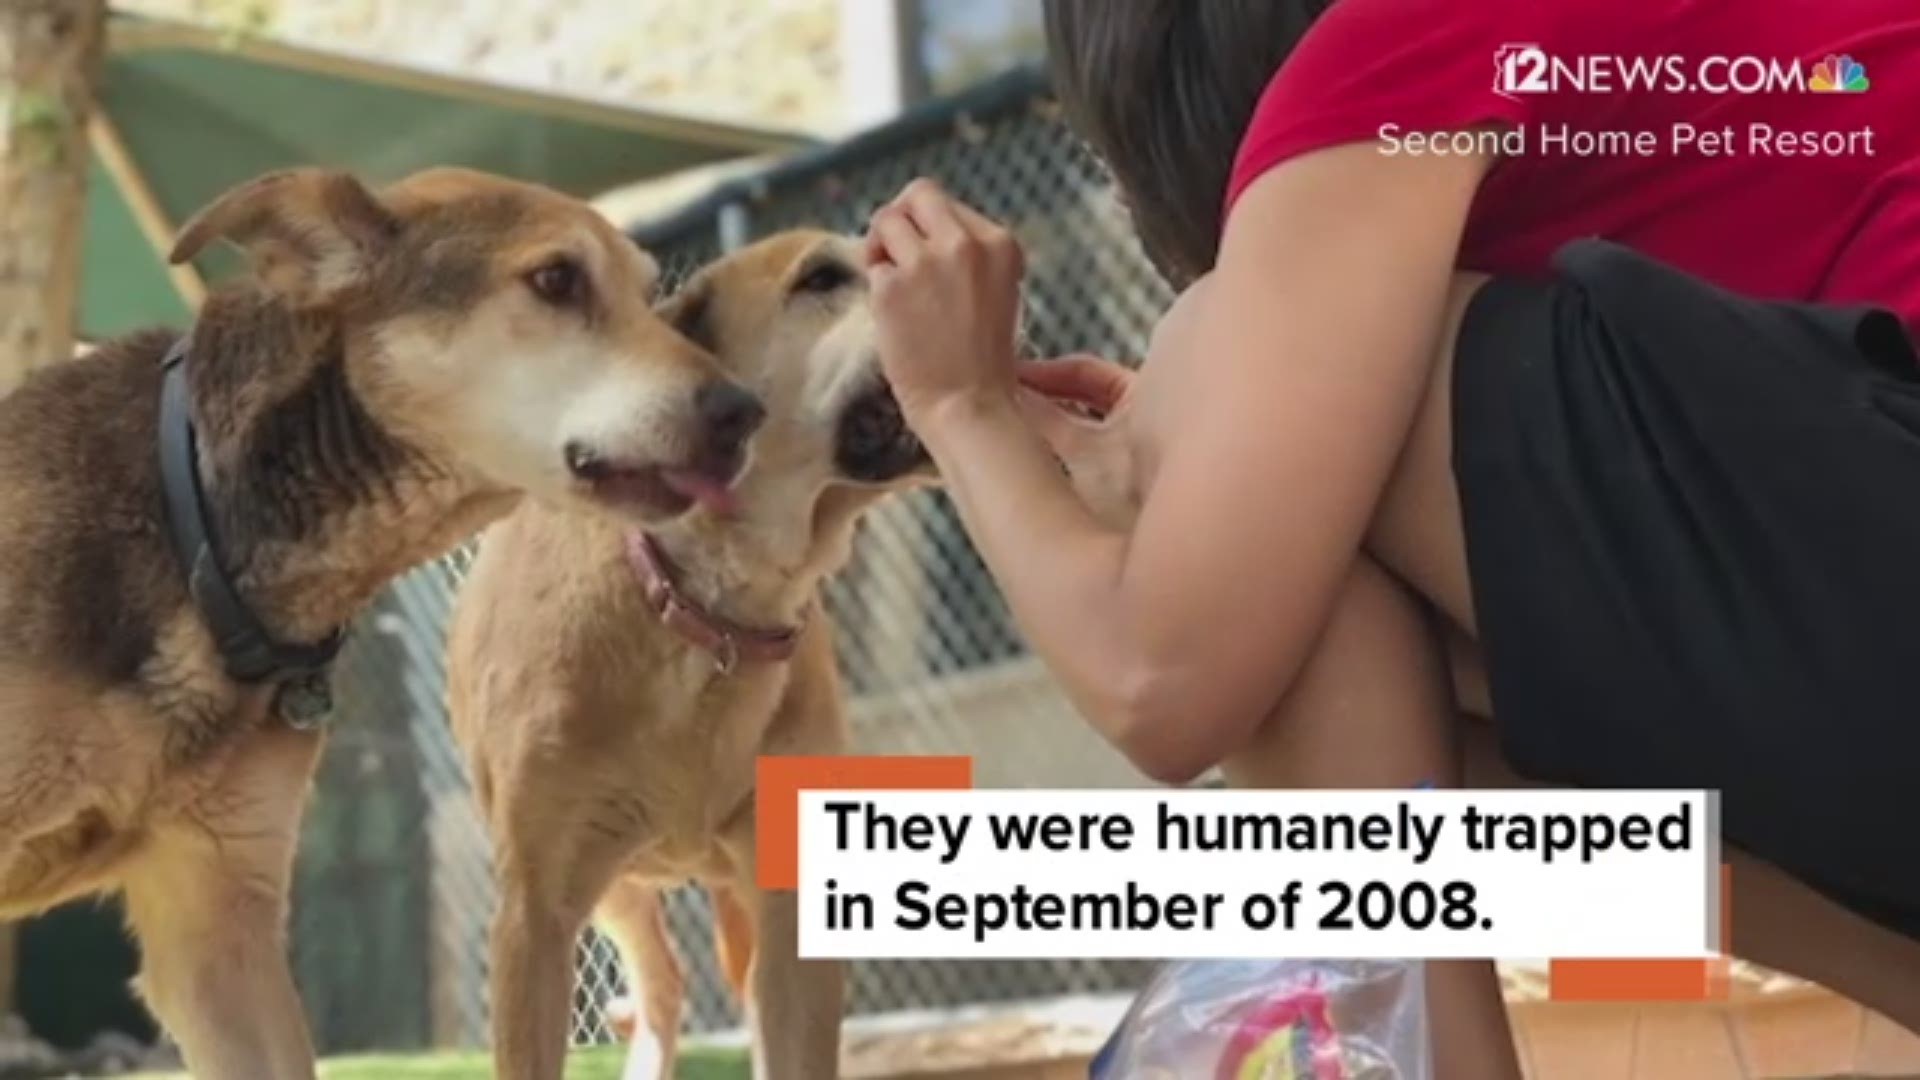 Mohave and Nellie, two 10-year-old dogs, have spent all of their lives waiting to be adopted. https://12ne.ws/2Lrkgao